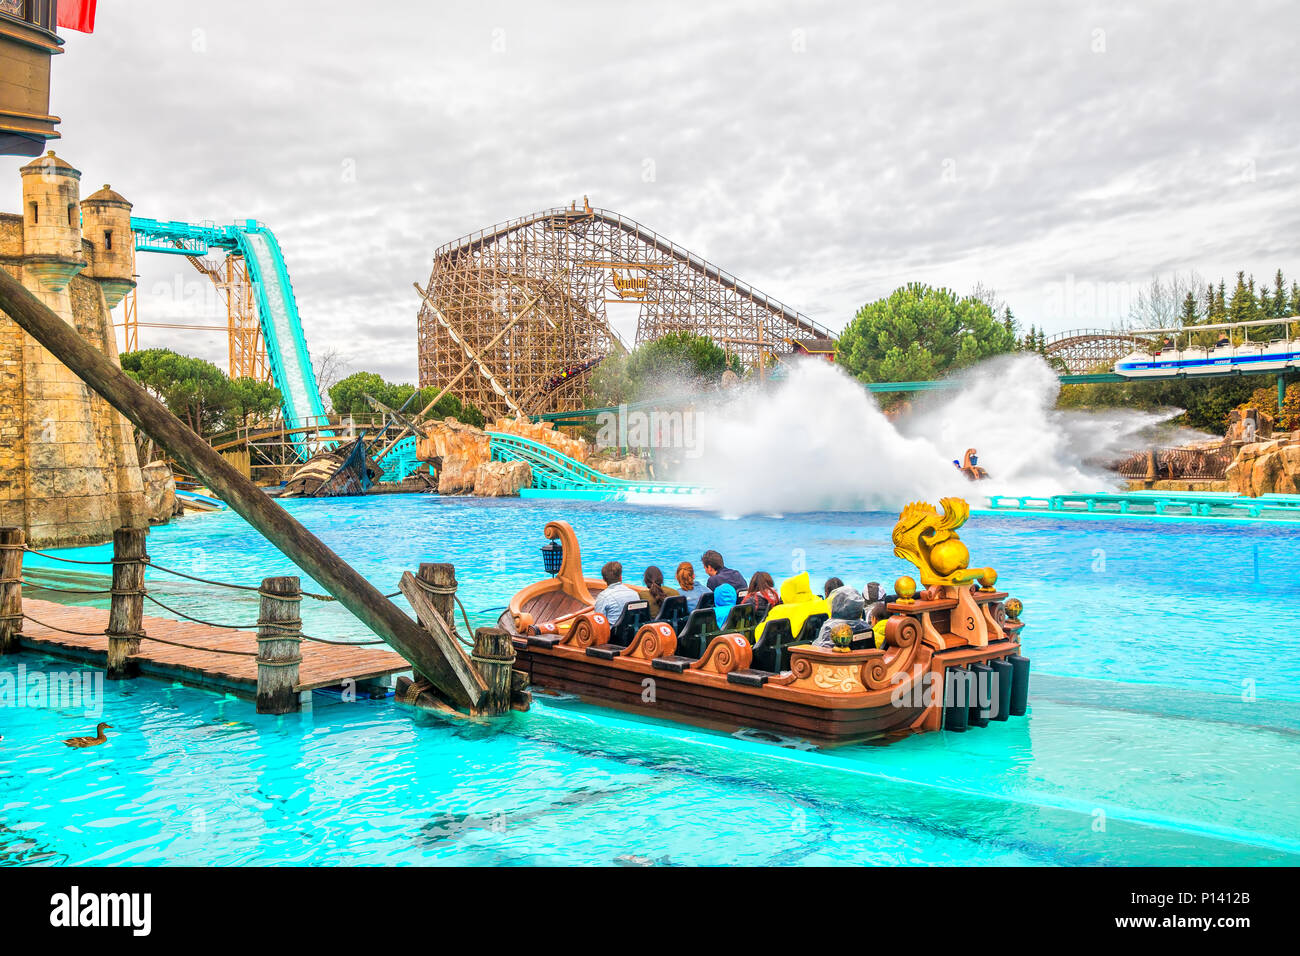 RUST, GERMANY - March 31, 2018 - Guests riding boats in Europa-Park. Europa-Park is a second largest park resort in Europe. Stock Photo